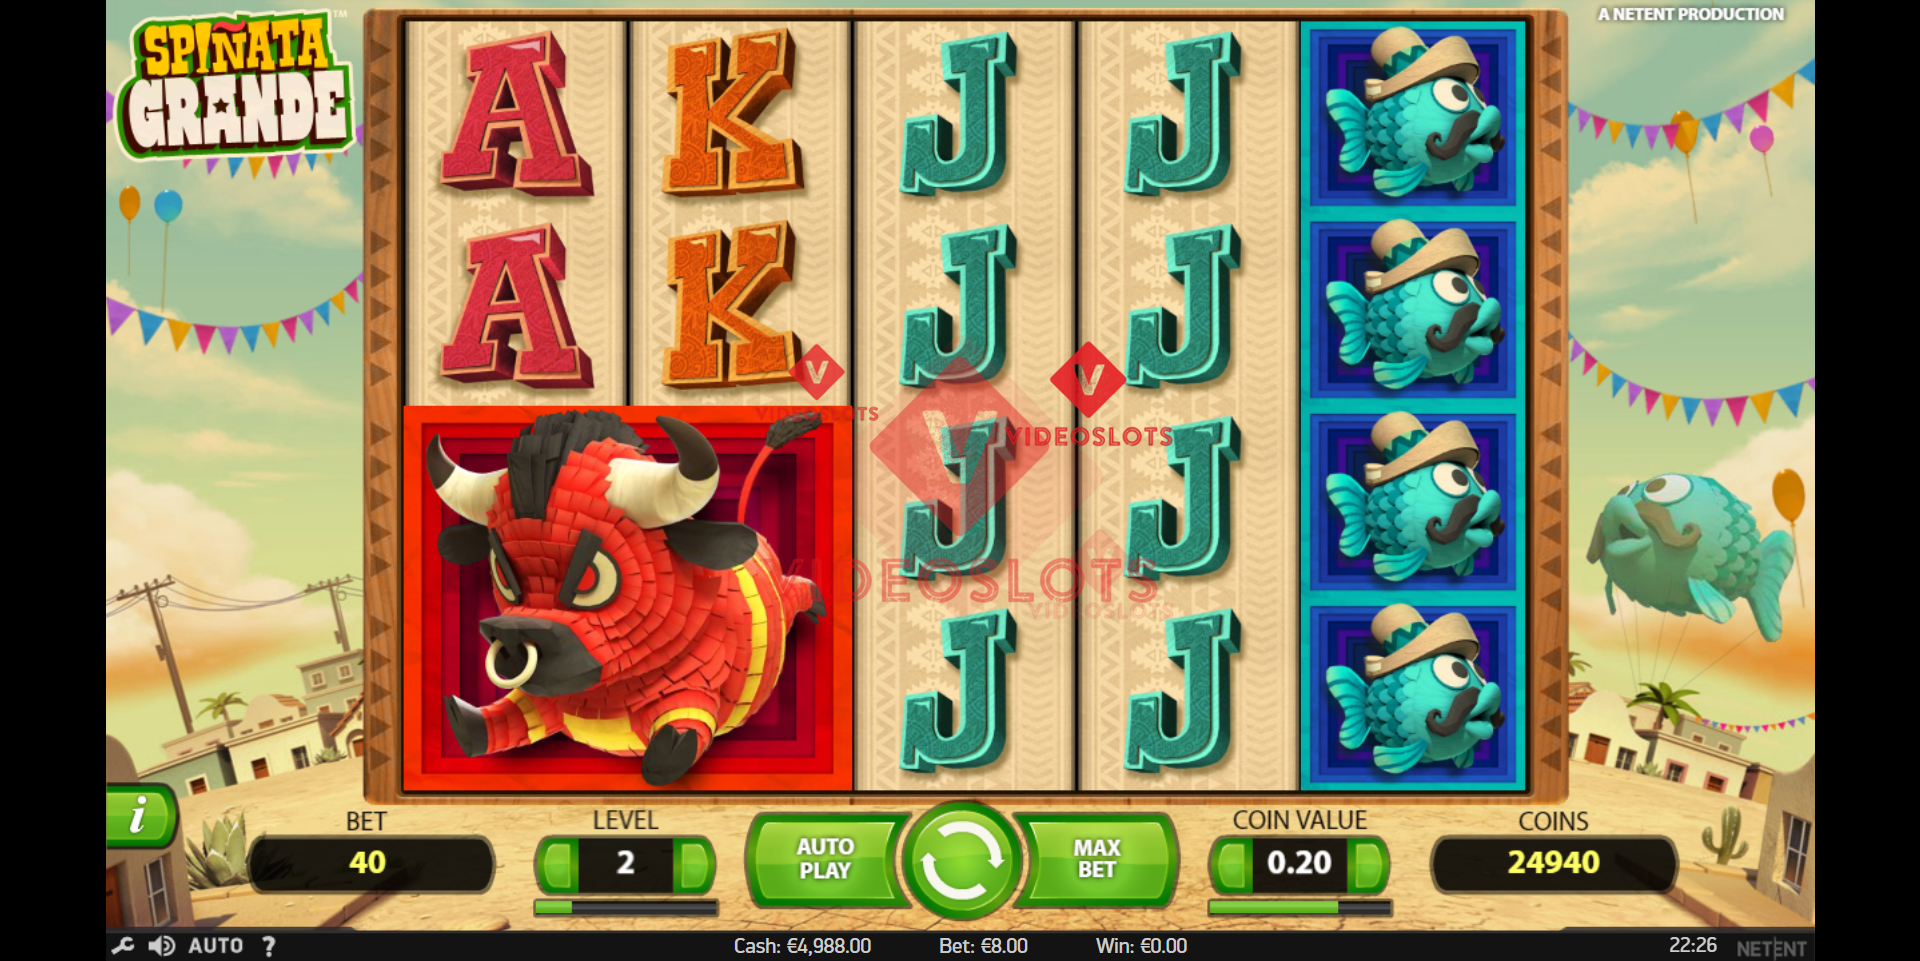 Base Game for Spinata Grande slot from NetEnt